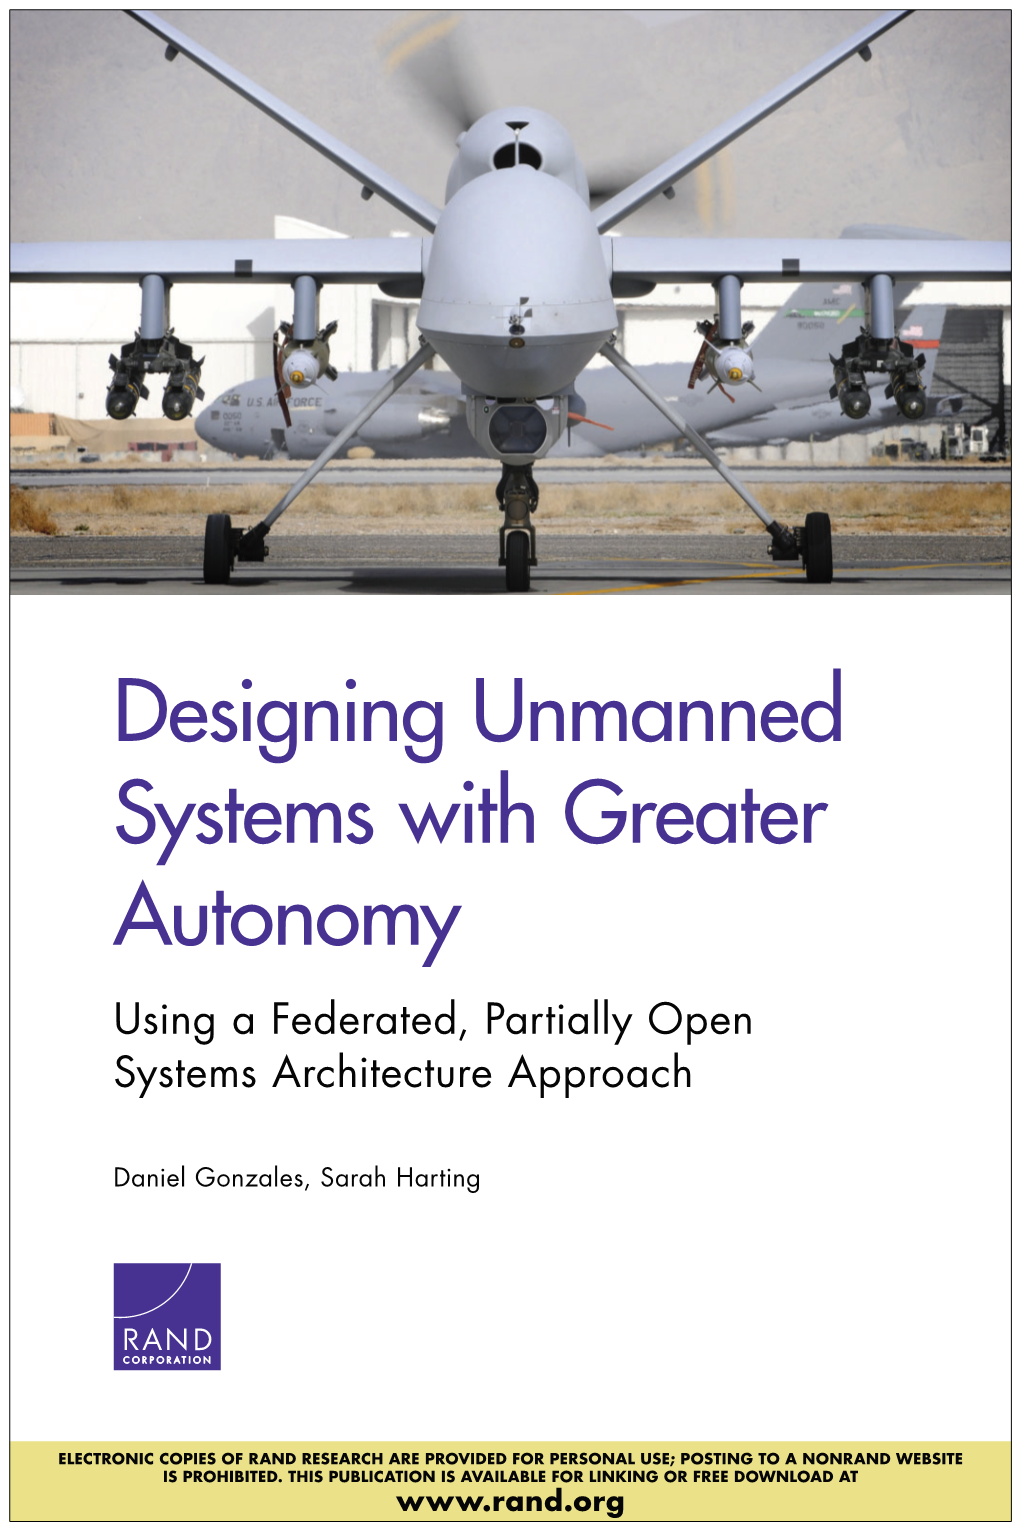 Designing Unmanned Systems with Greater Autonomy Using a Federated, Partially Open Systems Architecture Approach